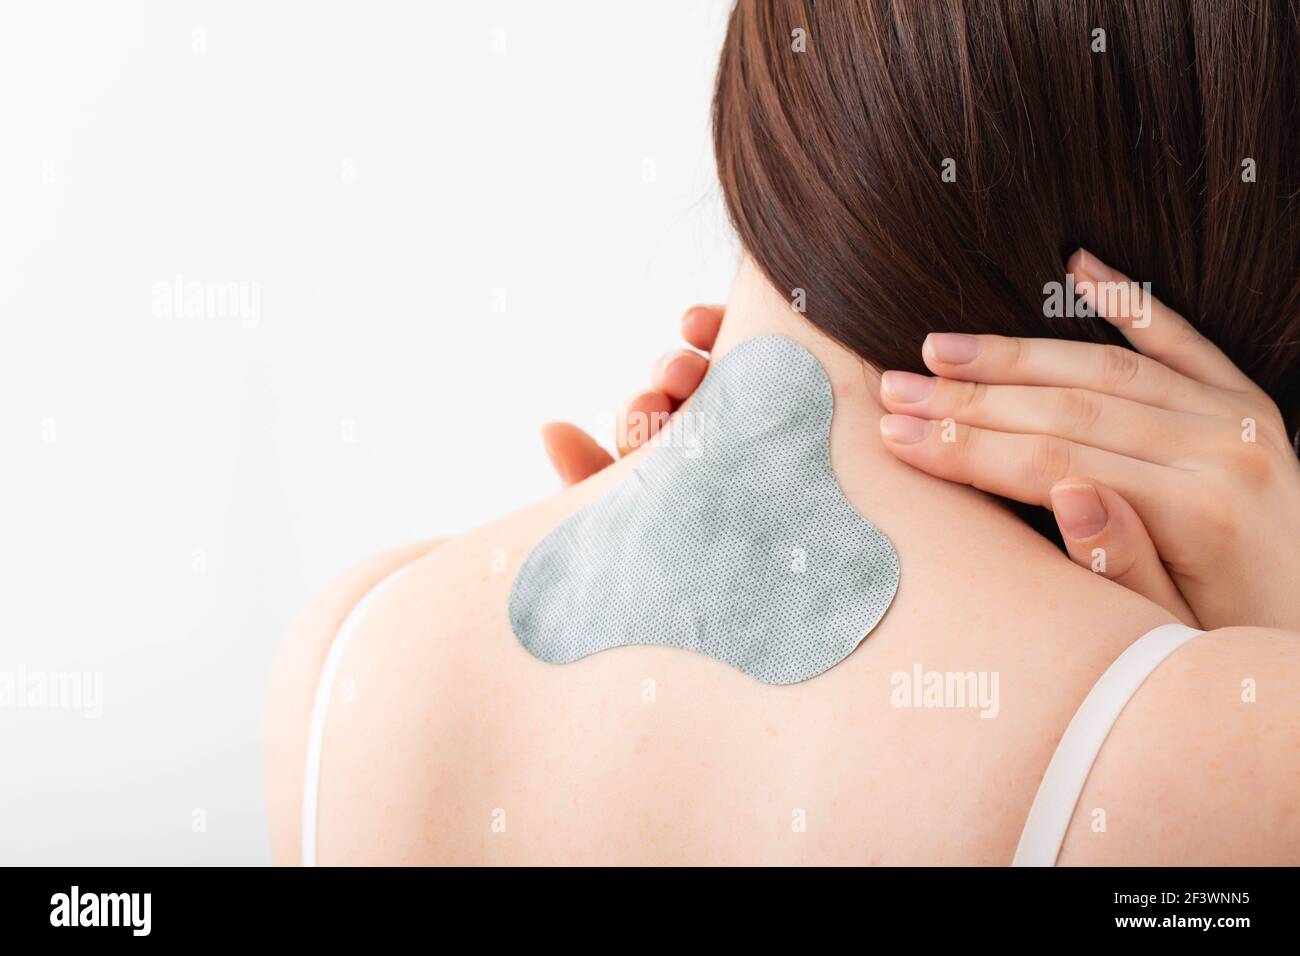 Medical plaster for relieving pain in the neck and spine. Anti-inflammatory with analgesic effect, elimination of muscle spasm in the girl's neck Stock Photo